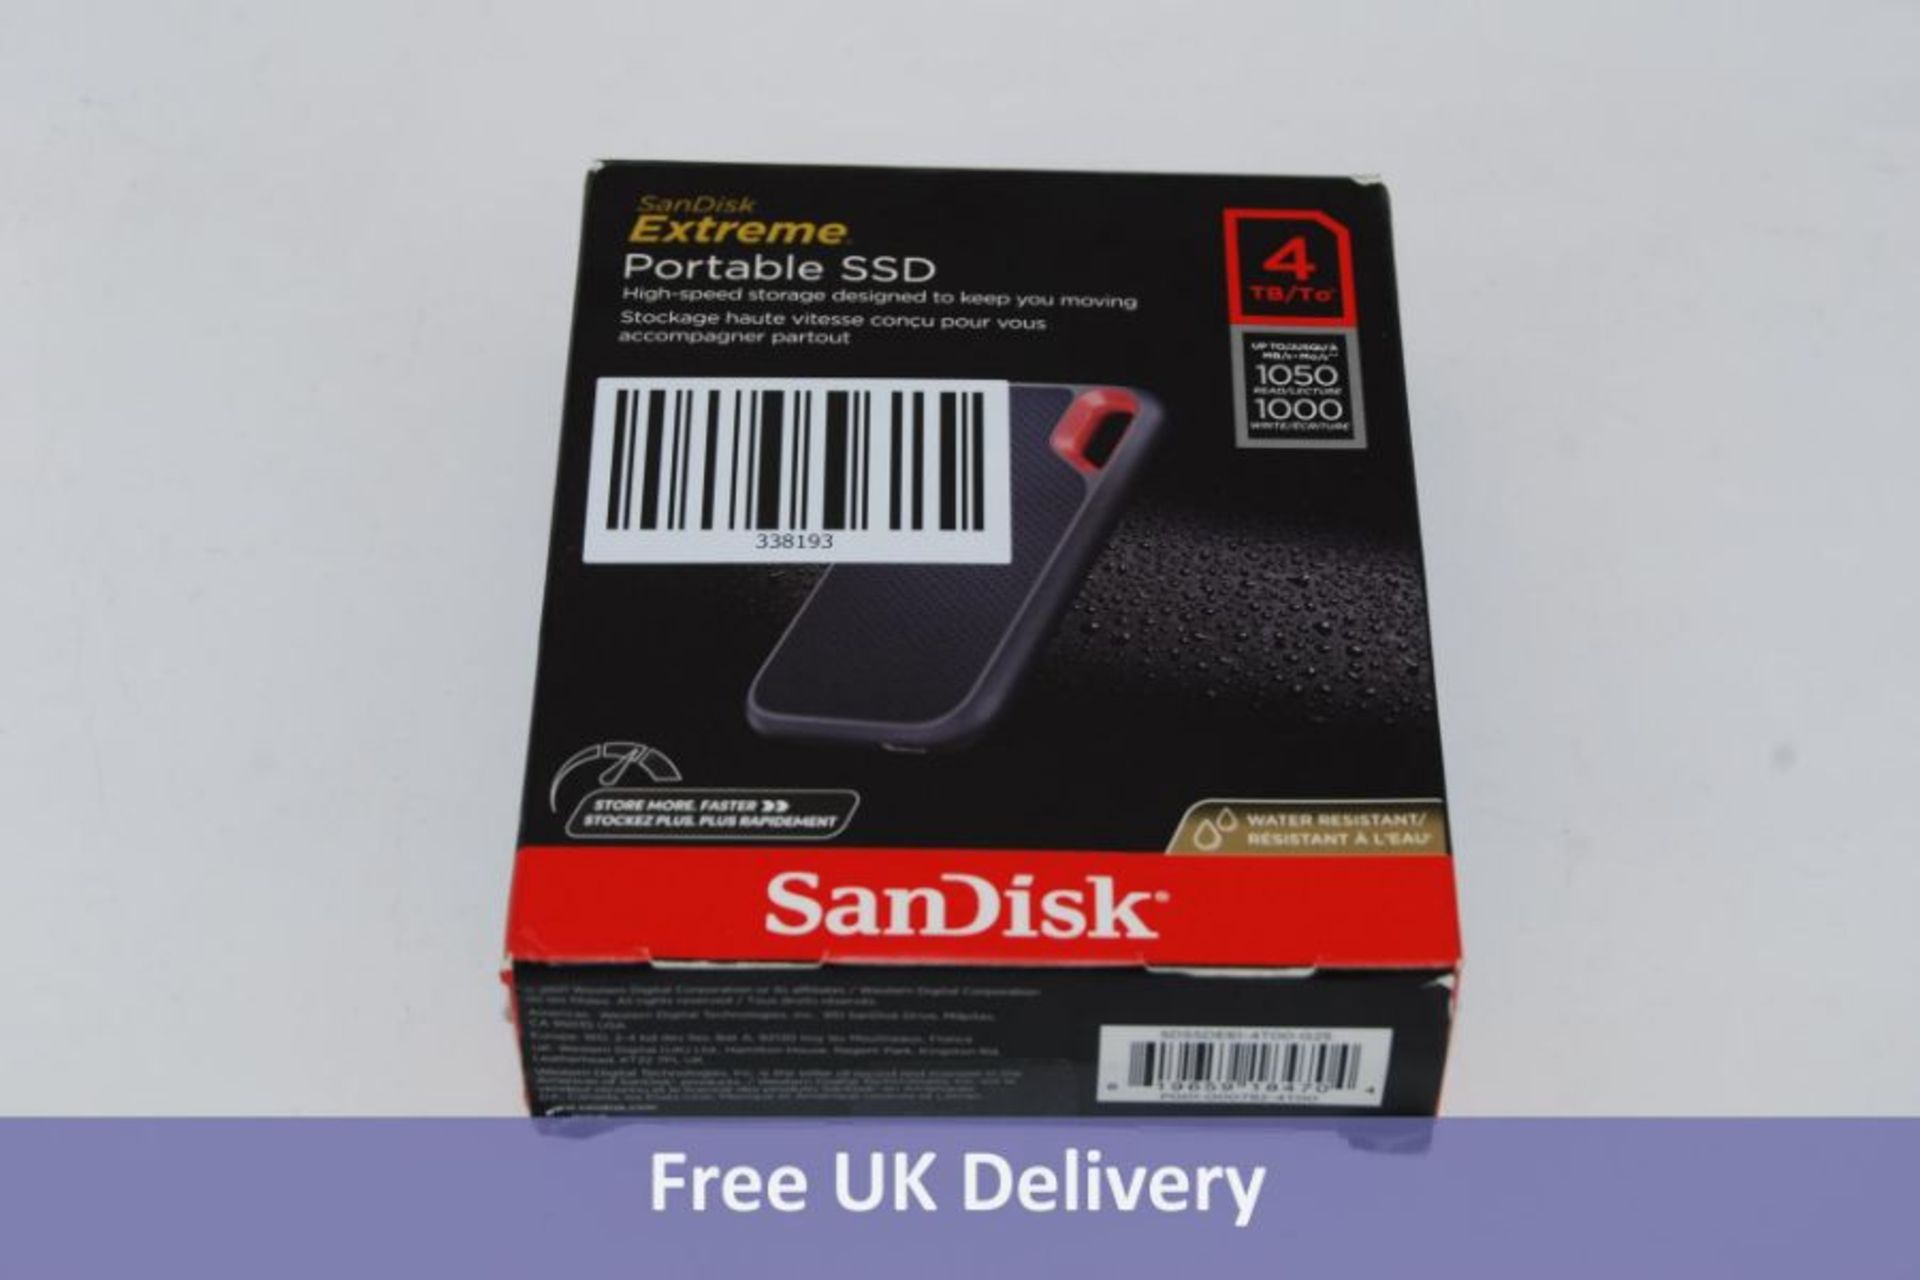 SanDisk Extreme Portable SSD, 4TB. Used, wiped and tested. Boxed with USB-C cable